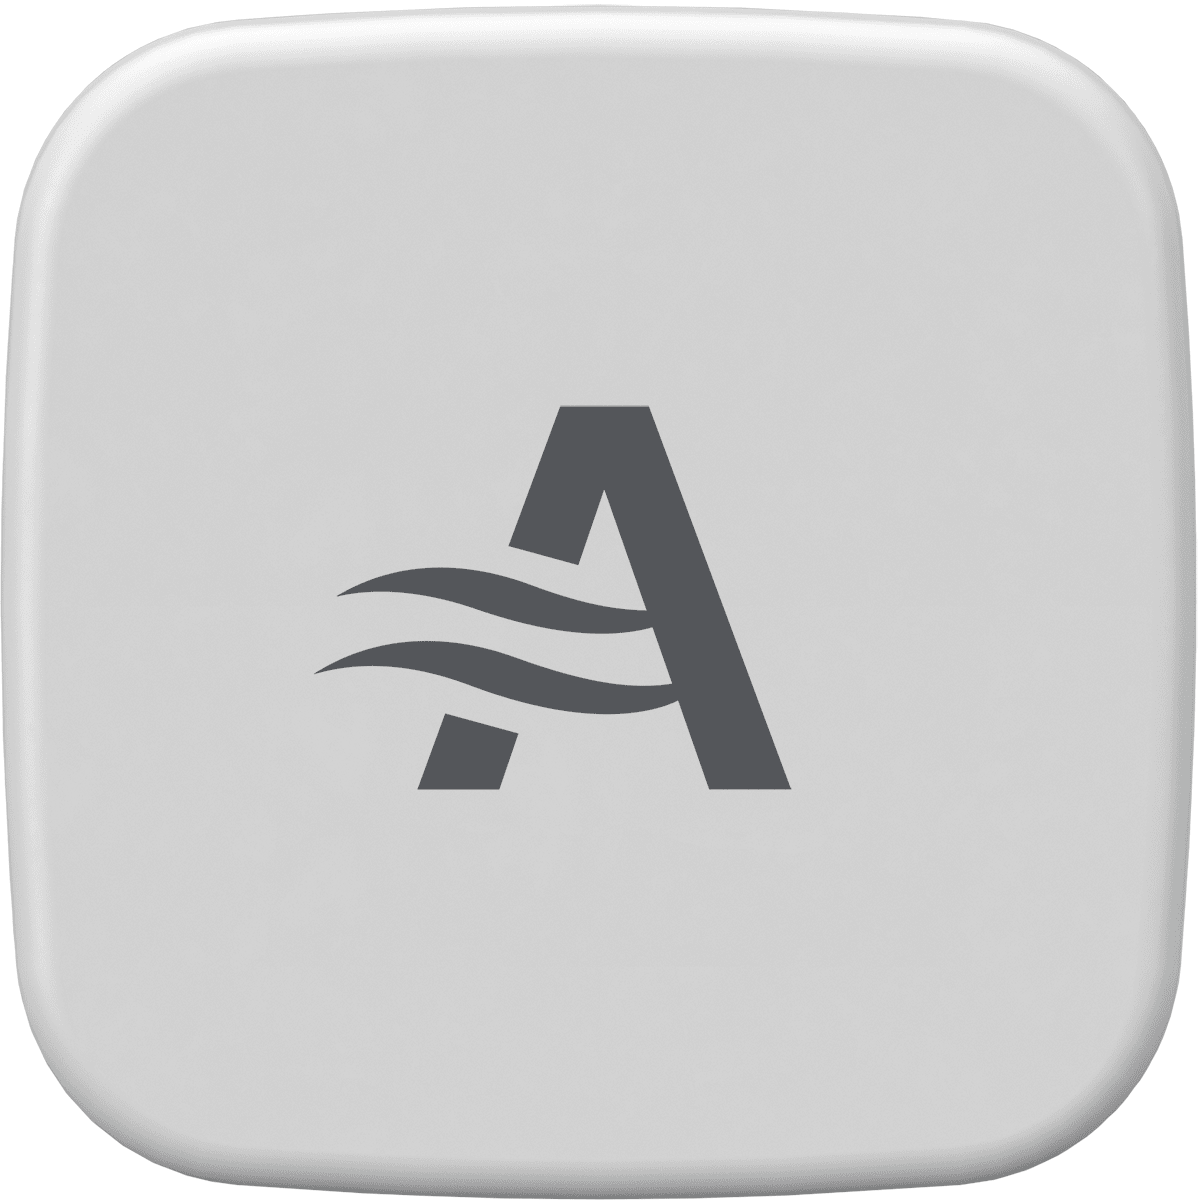 AprilAire Z10IDT Wireless Indoor Temperature and Humidity Sensor for S86WMUPR Wi-Fi Thermostat